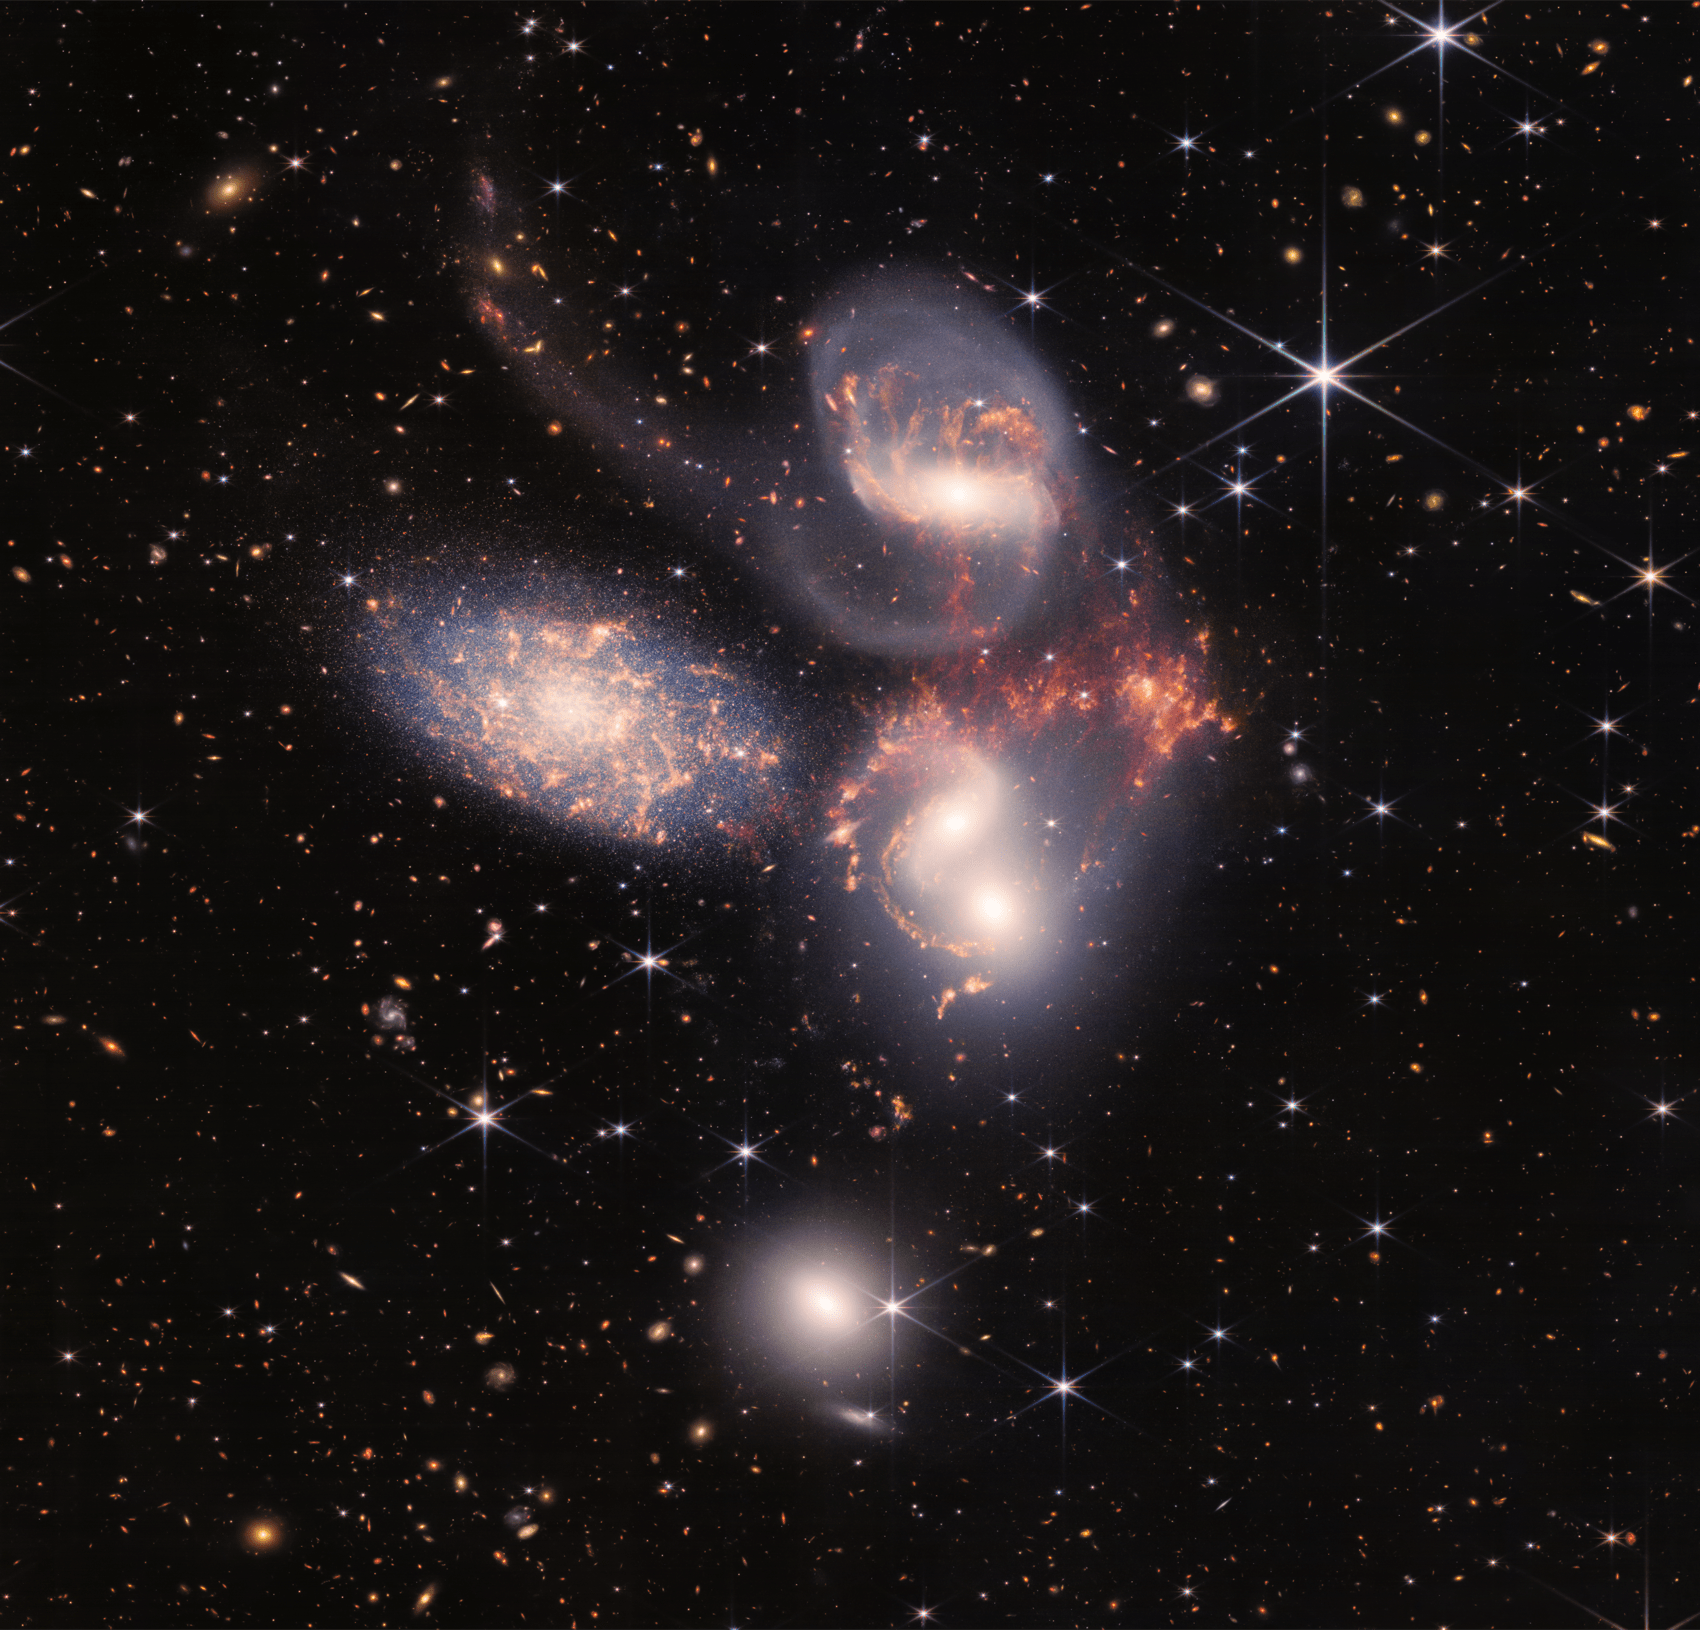 An image, captured by JWST, of a group of five galaxies that appear close to each other in the sky: two in the middle, one toward the top, one to the upper left, and one toward the bottom. Four of the five appear to be touching. One is somewhat separated. In the image, the galaxies are large relative to the hundreds of much smaller (more distant) galaxies in the background. All five galaxies have bright white cores. Each has a slightly different size, shape, structure, and coloring. Scattered across the image, in front of the galaxies are number of foreground stars with diffraction spikes: bright white points, each with eight bright lines radiating out from the center.